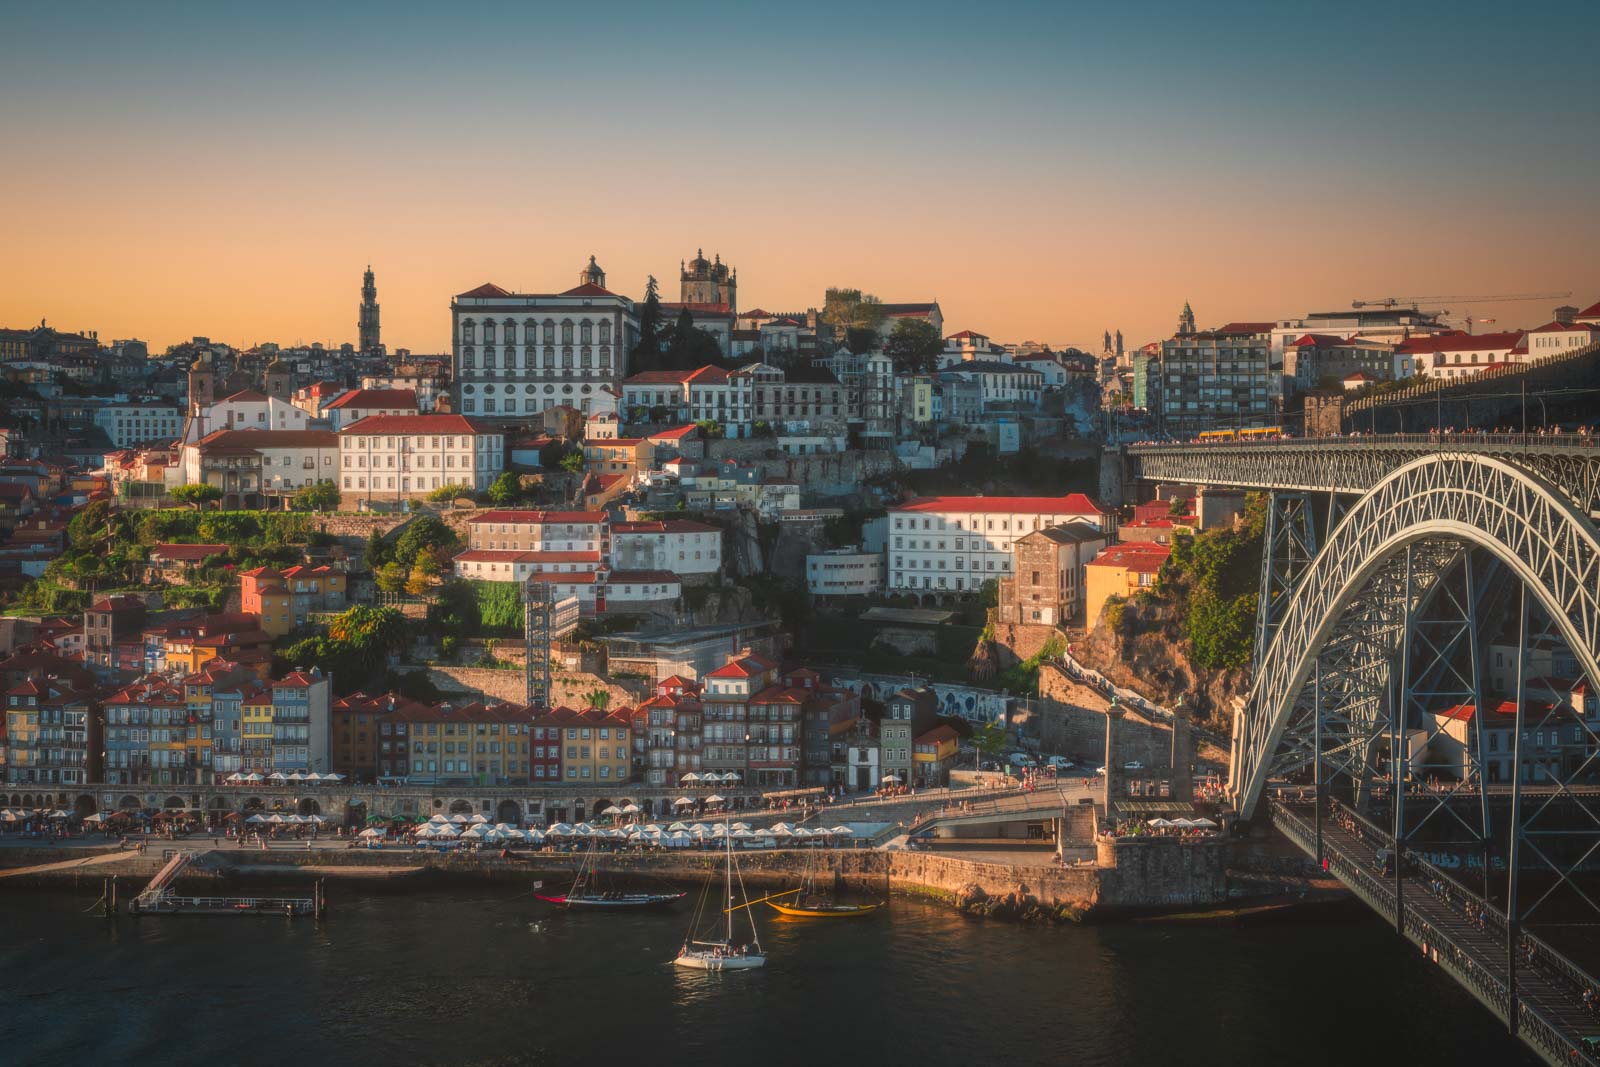 19 Fun and Interesting Facts About Portugal You Should Know